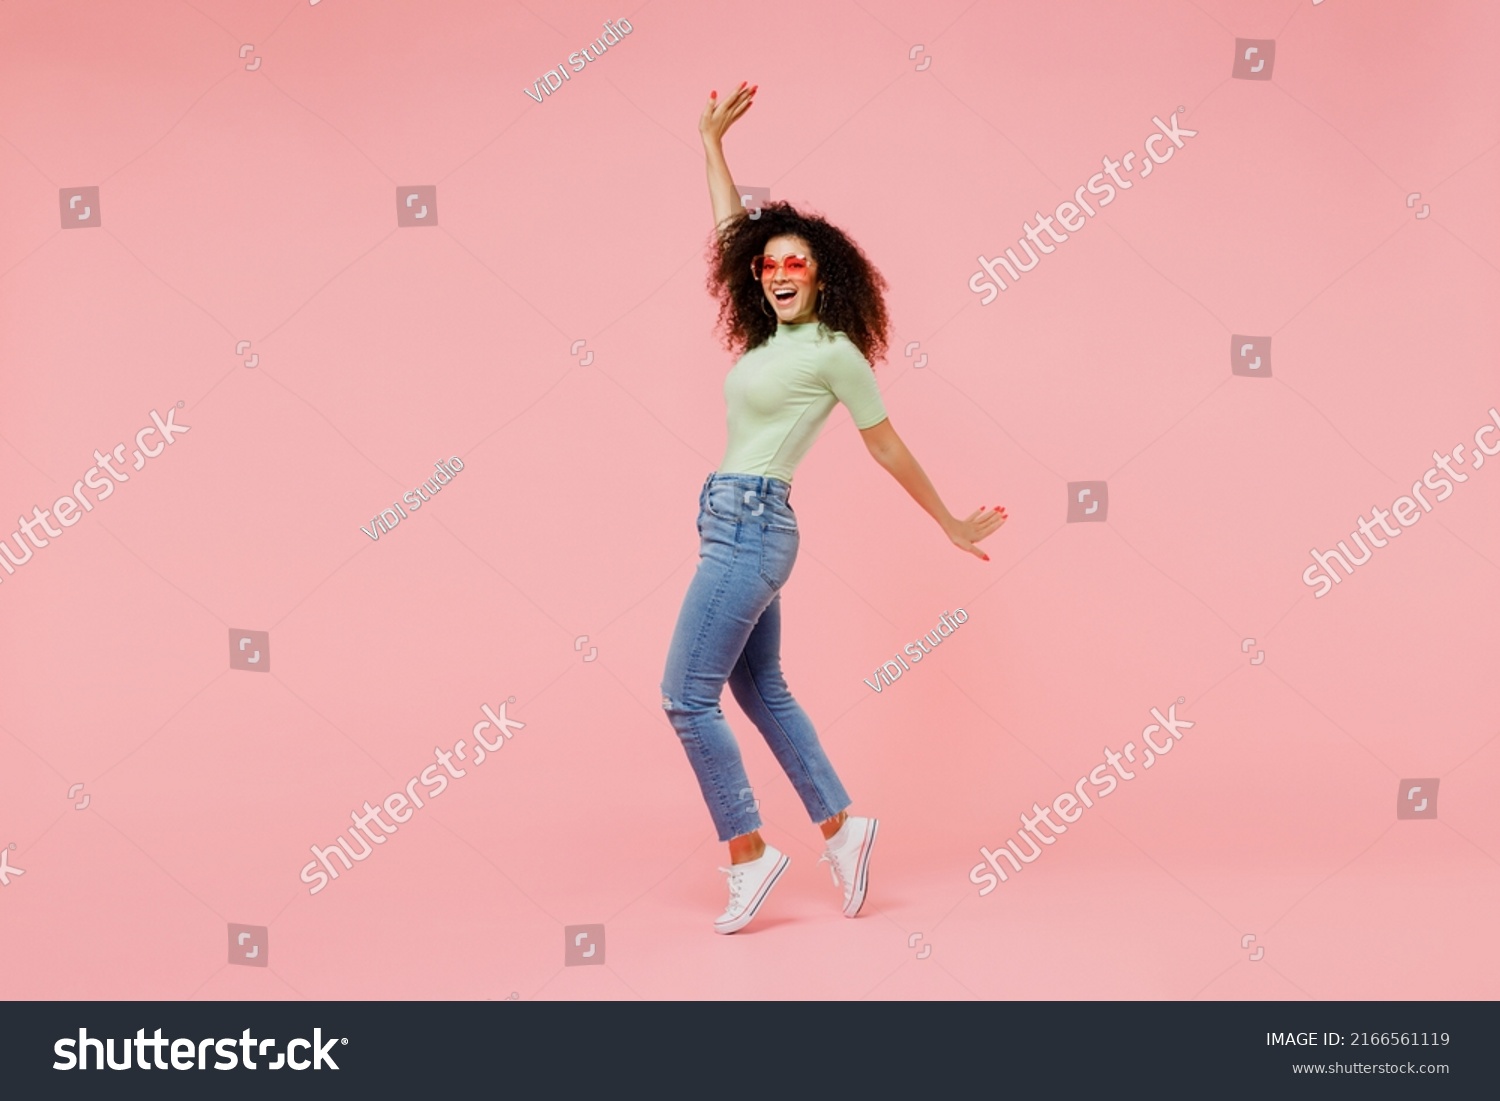 Full size body length young curly latin woman 20s wears casual clothes sunglasses stand on toes dance lean back have fun spreading hands isolated on plain pastel light pink background studio portrait #2166561119